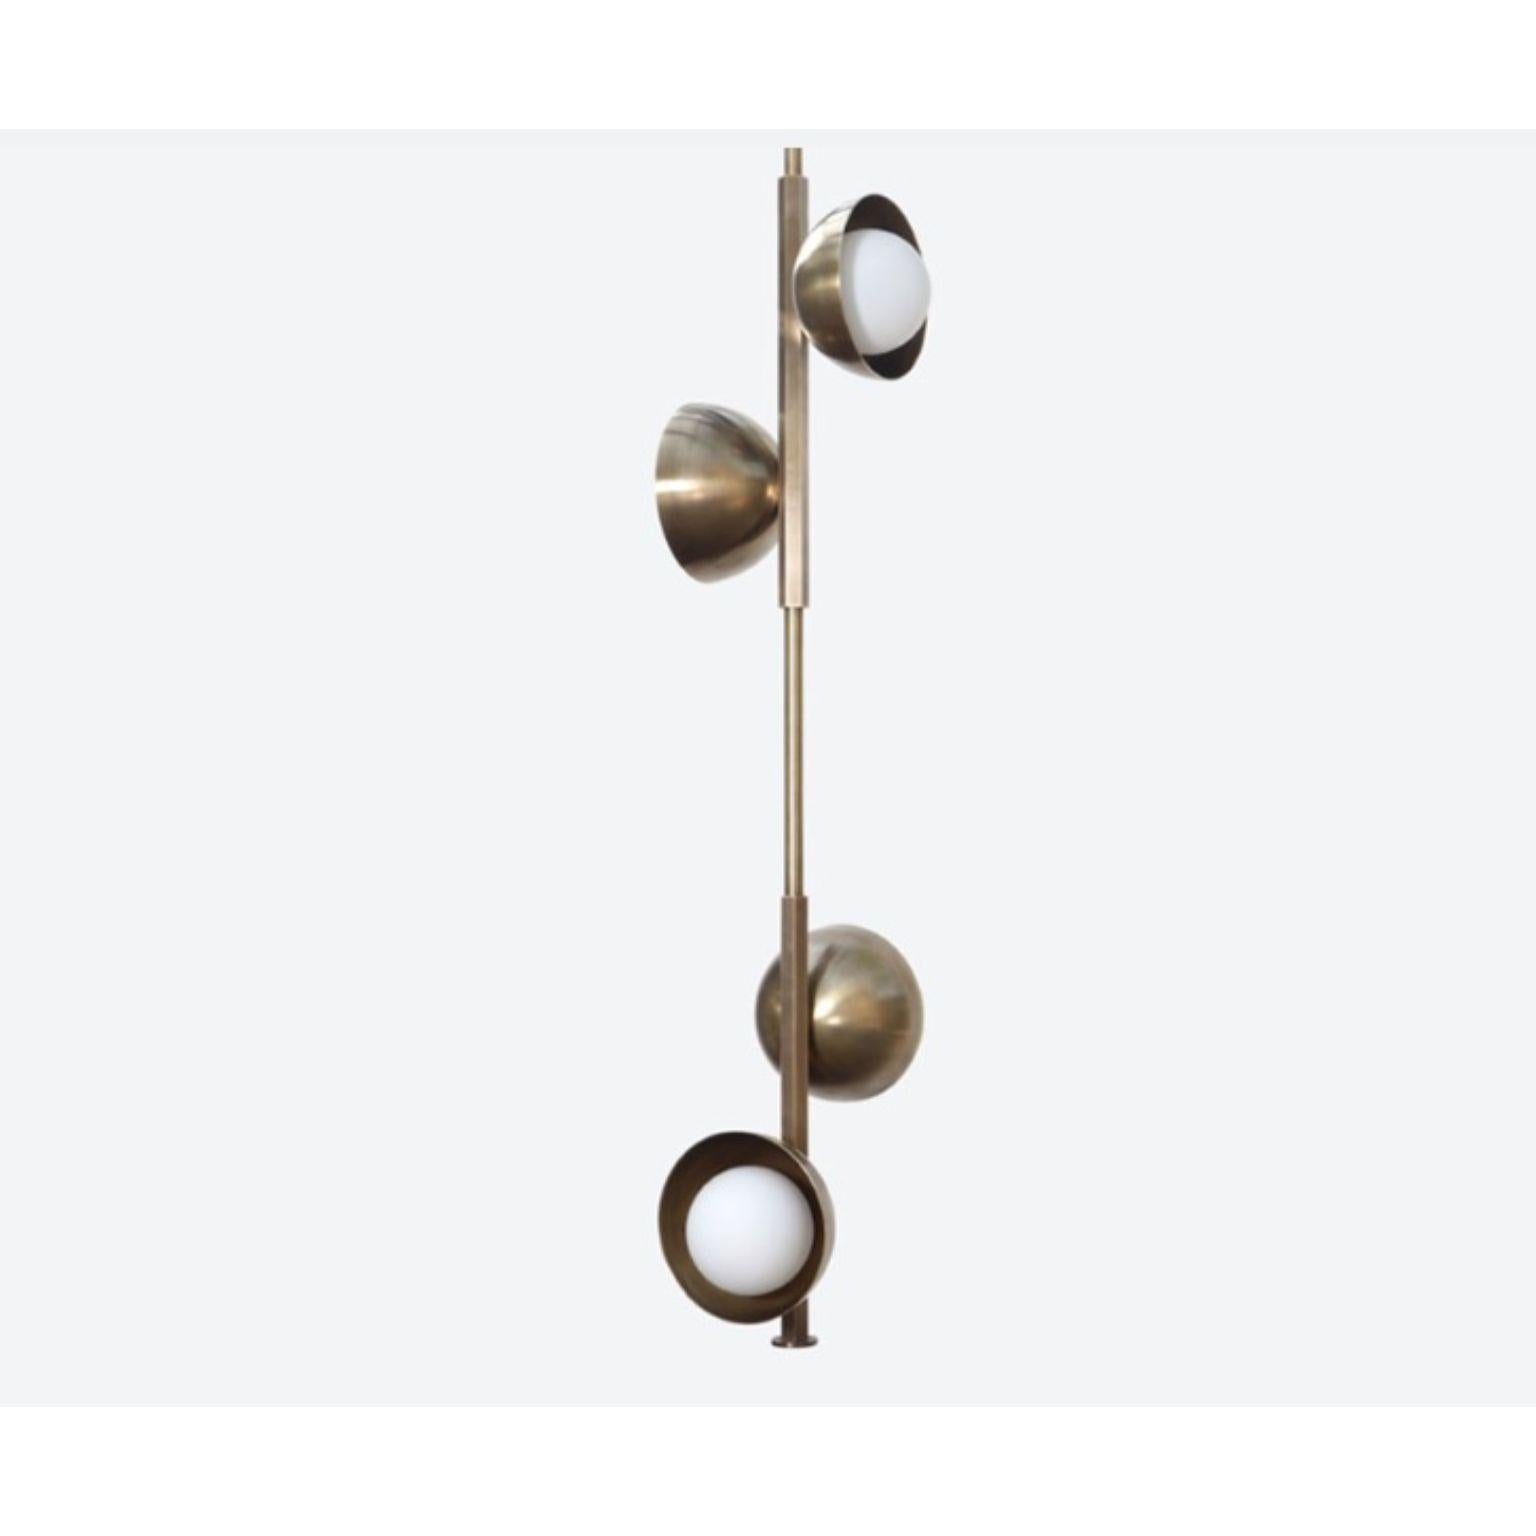 Stem 4 Brass Dome Pendant Lamp by Lamp Shaper
Dimensions: D 23 x W 23 x H 119.5 cm.
Materials: Brass.

Different finishes available: raw brass, aged brass, burnt brass and brushed brass Please contact us.

All our lamps can be wired according to